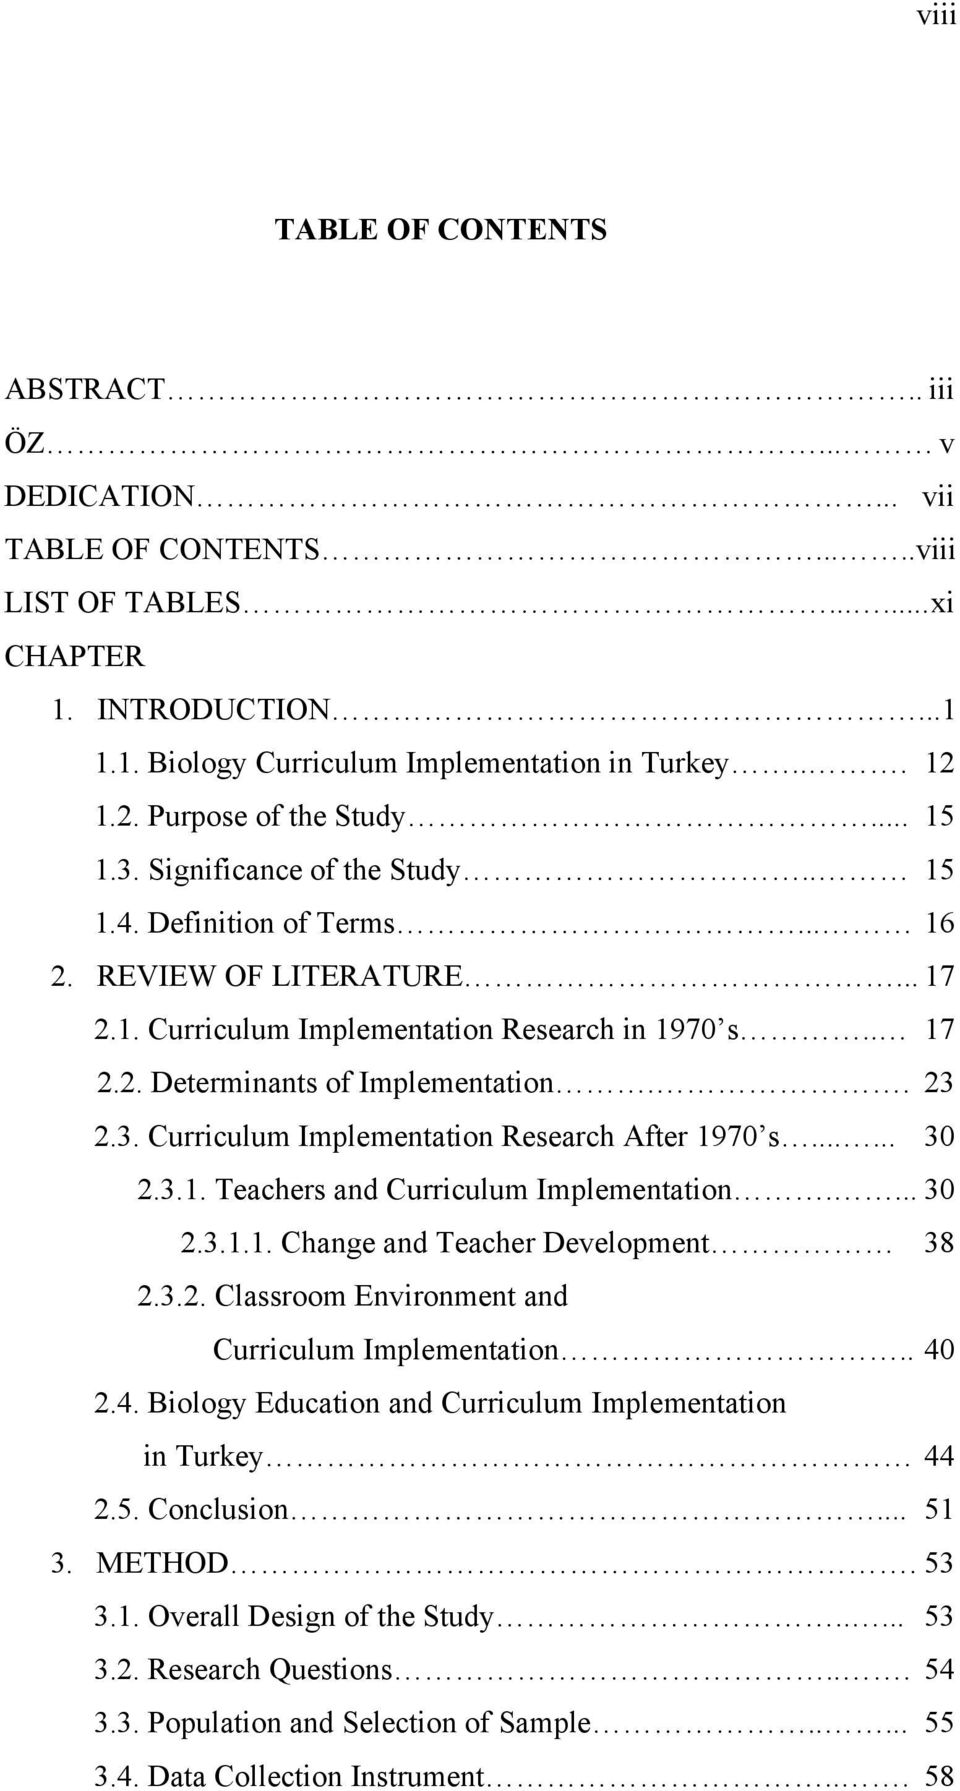 . 23 2.3. Curriculum Implementation Research After 1970 s...... 30 2.3.1. Teachers and Curriculum Implementation.... 30 2.3.1.1. Change and Teacher Development 38 2.3.2. Classroom Environment and Curriculum Implementation.